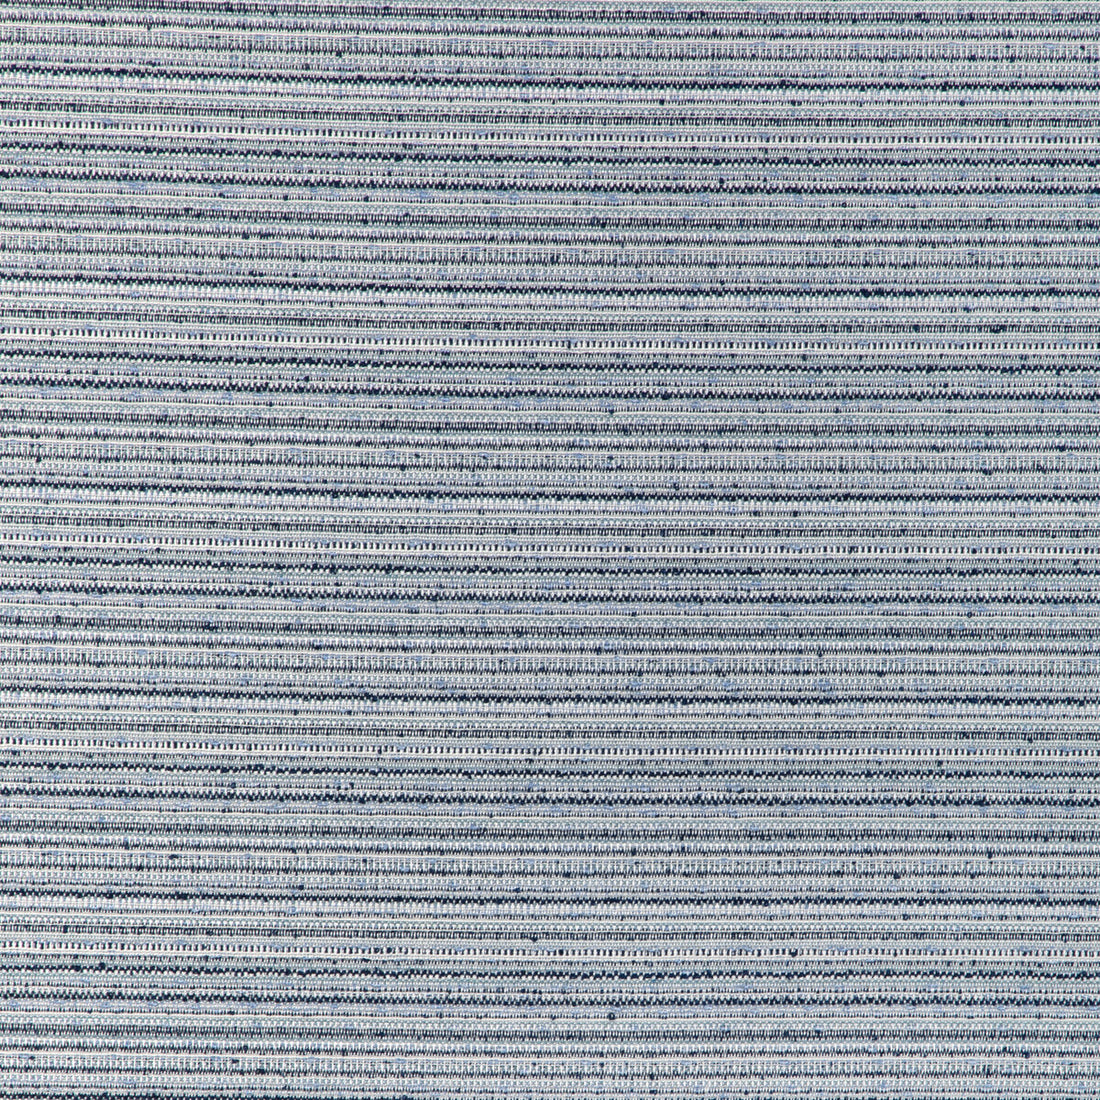 Portside Stripe fabric in marine color - pattern 36931.515.0 - by Kravet Couture in the Riviera collection